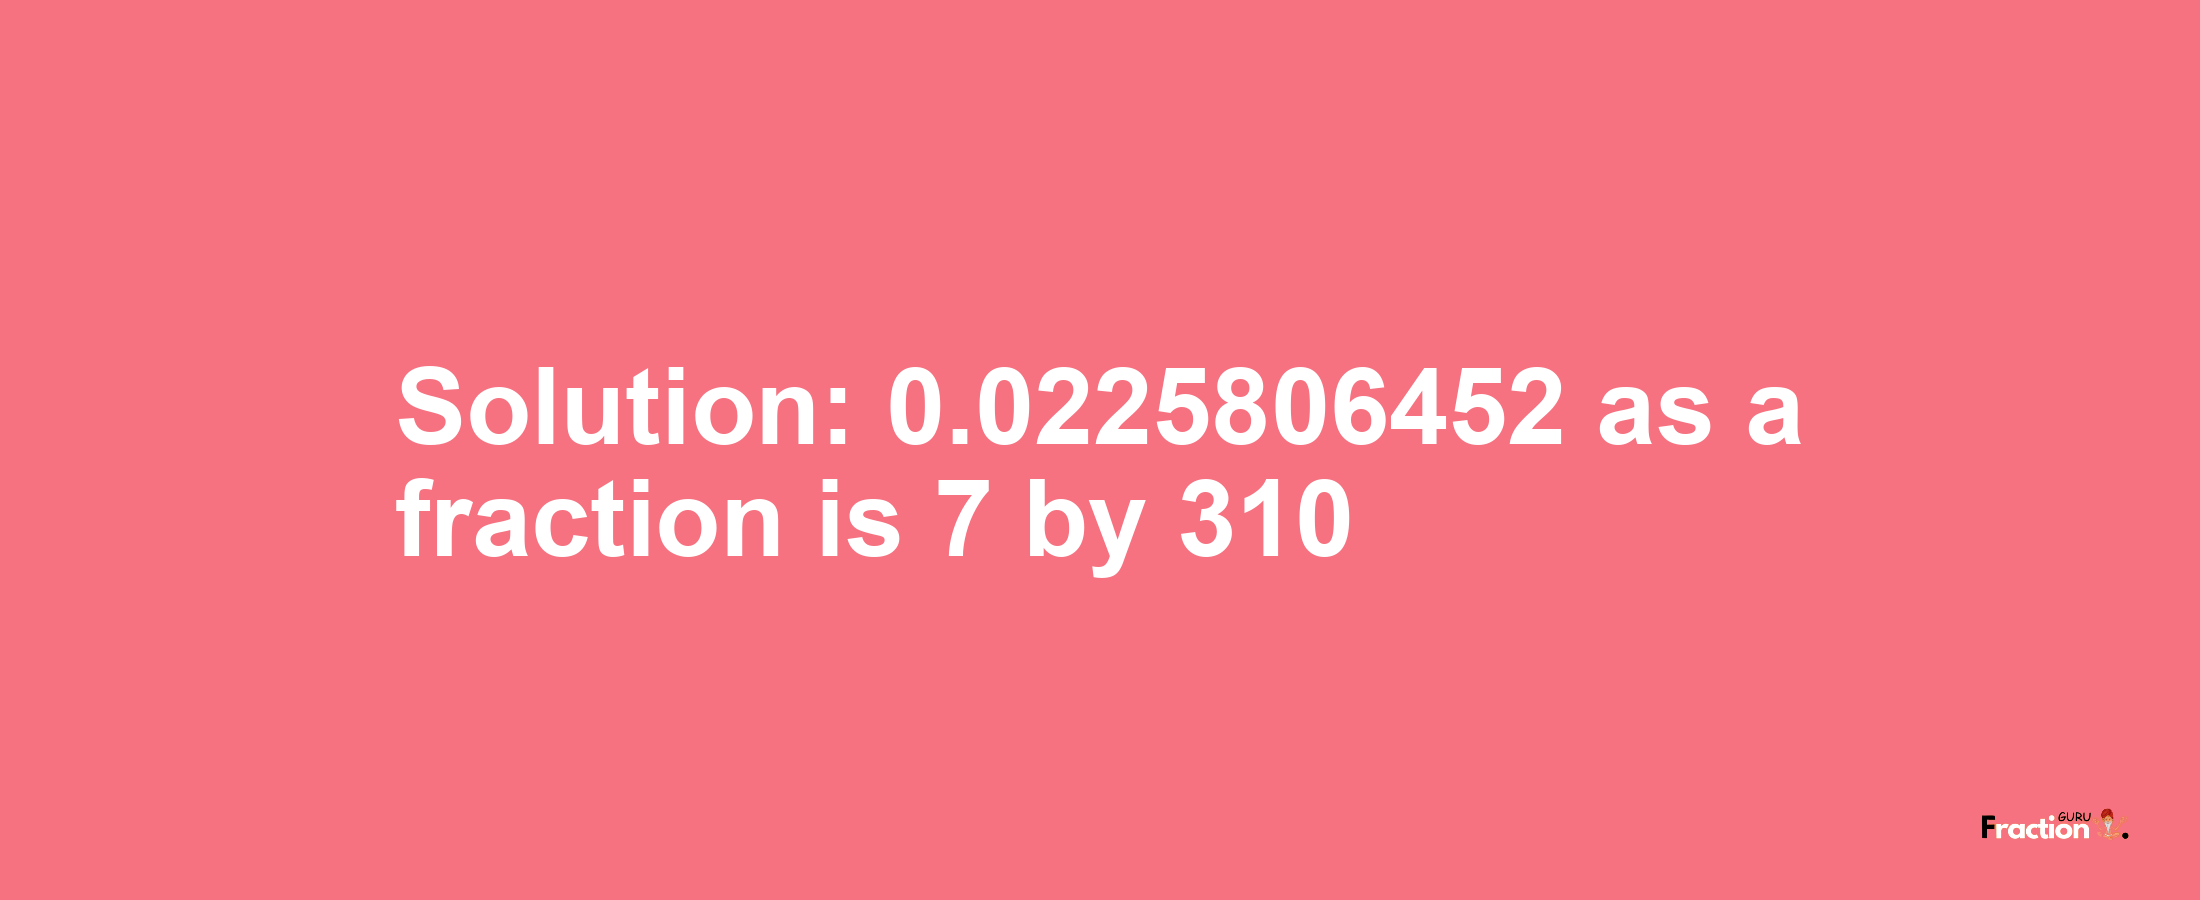 Solution:0.0225806452 as a fraction is 7/310